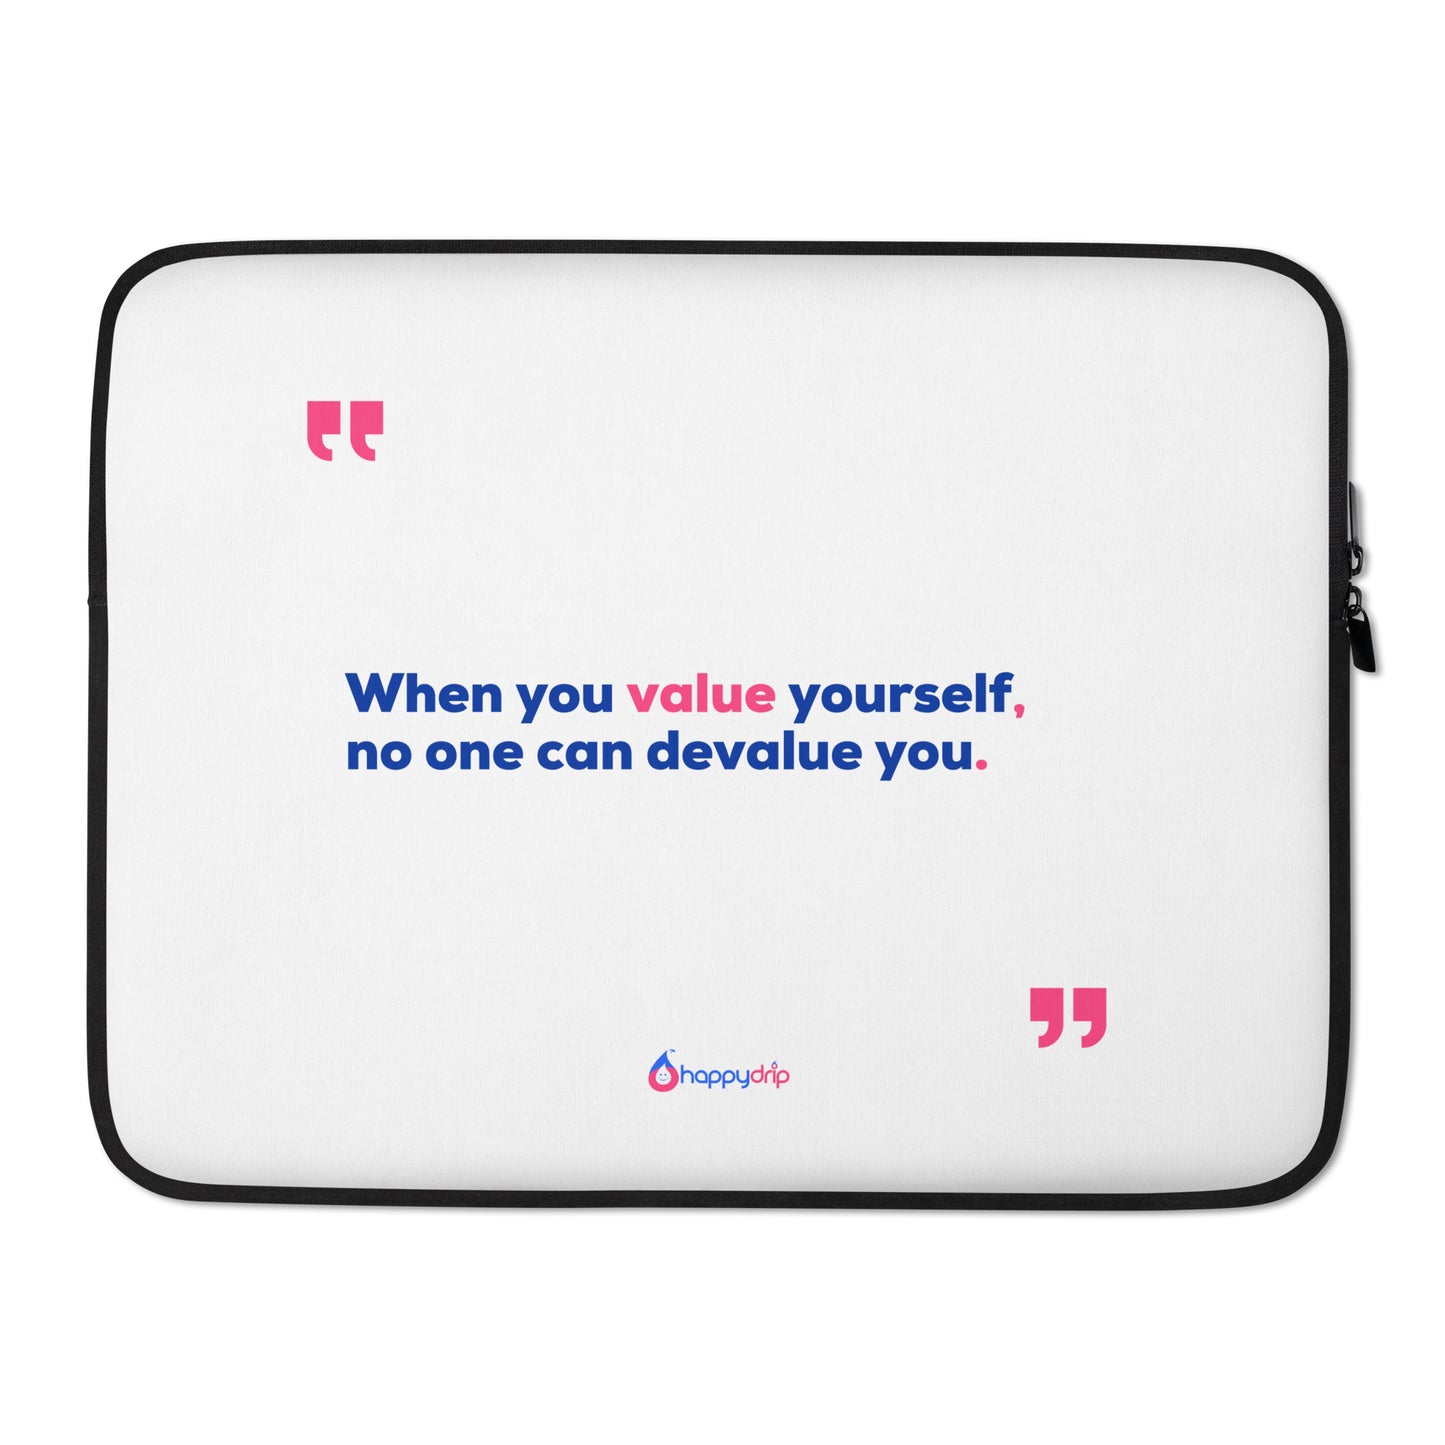 When you value yourself, no one can devalue you - White Laptop Sleeve